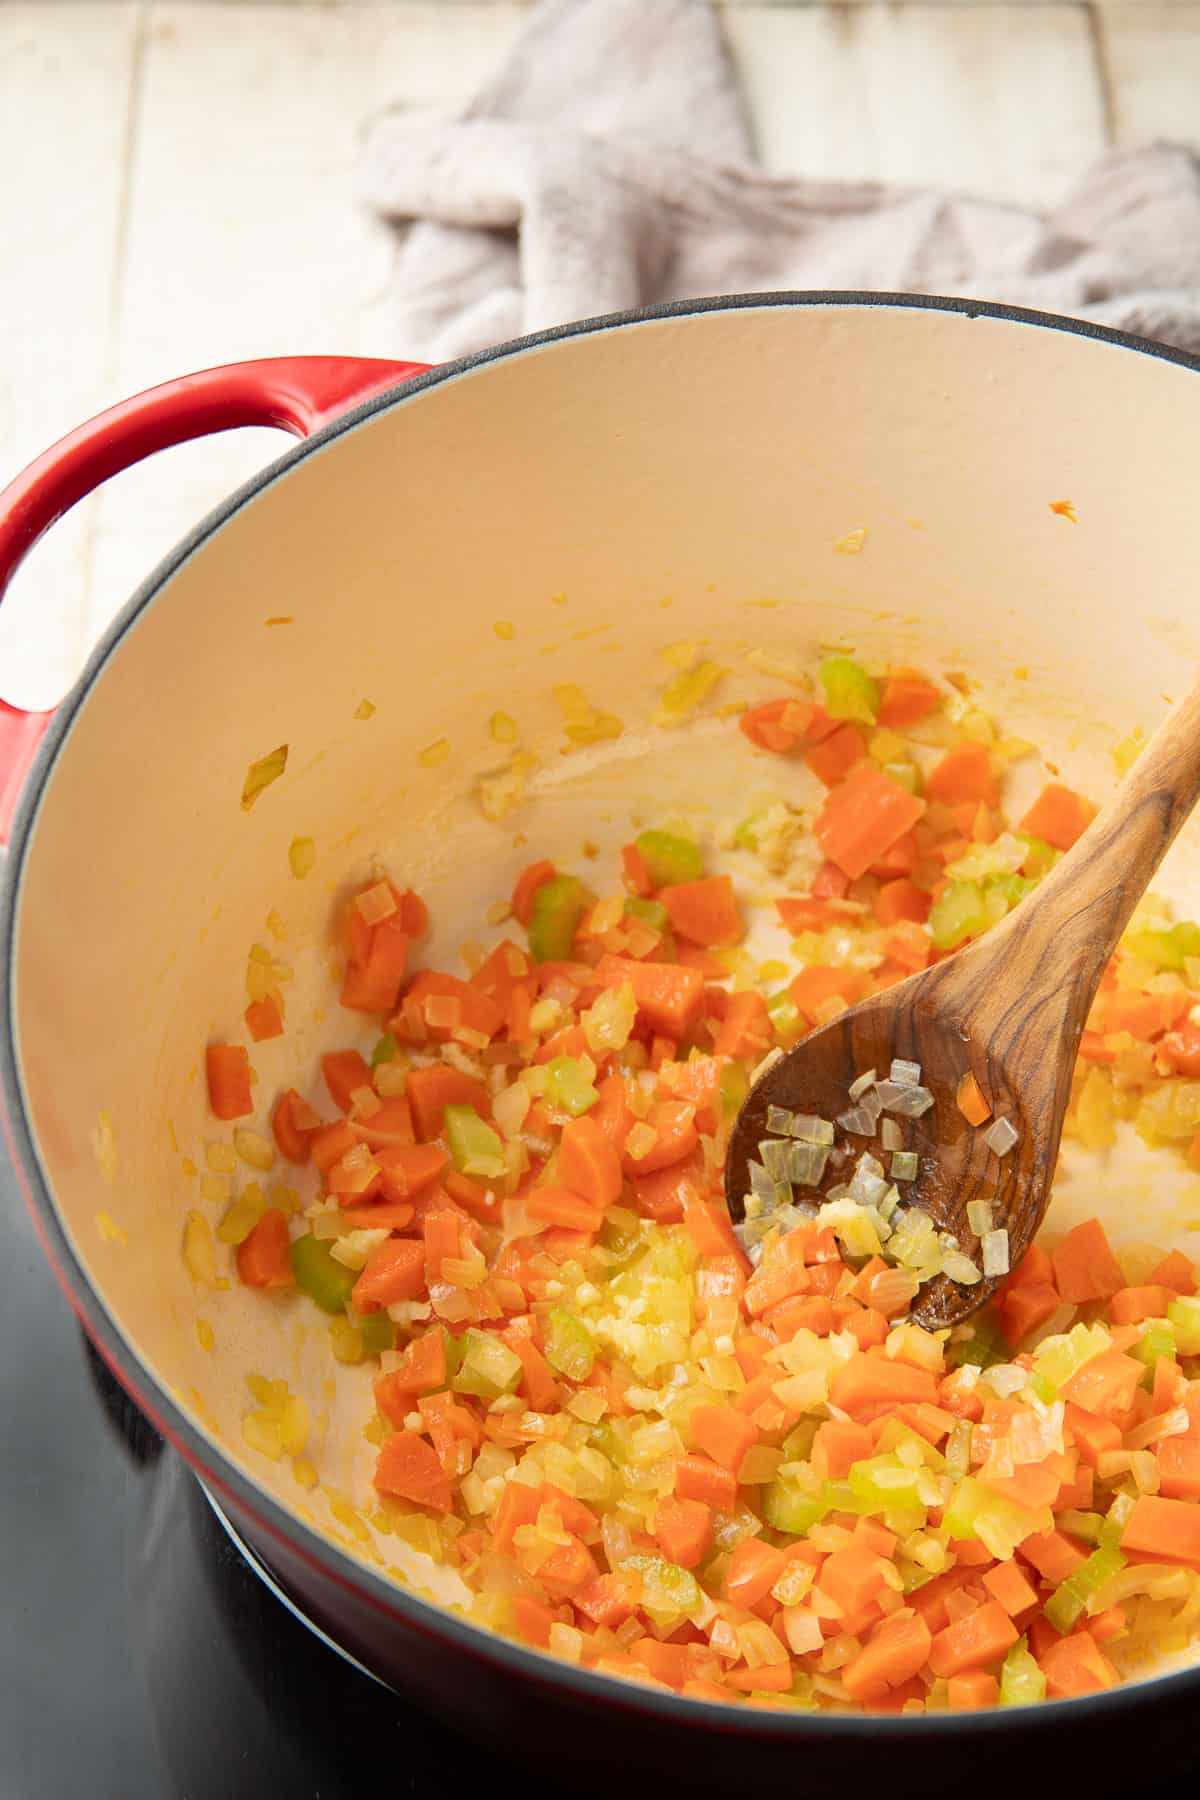 Diced carrots, celery, onion, and minced garlic cooking in a pot.